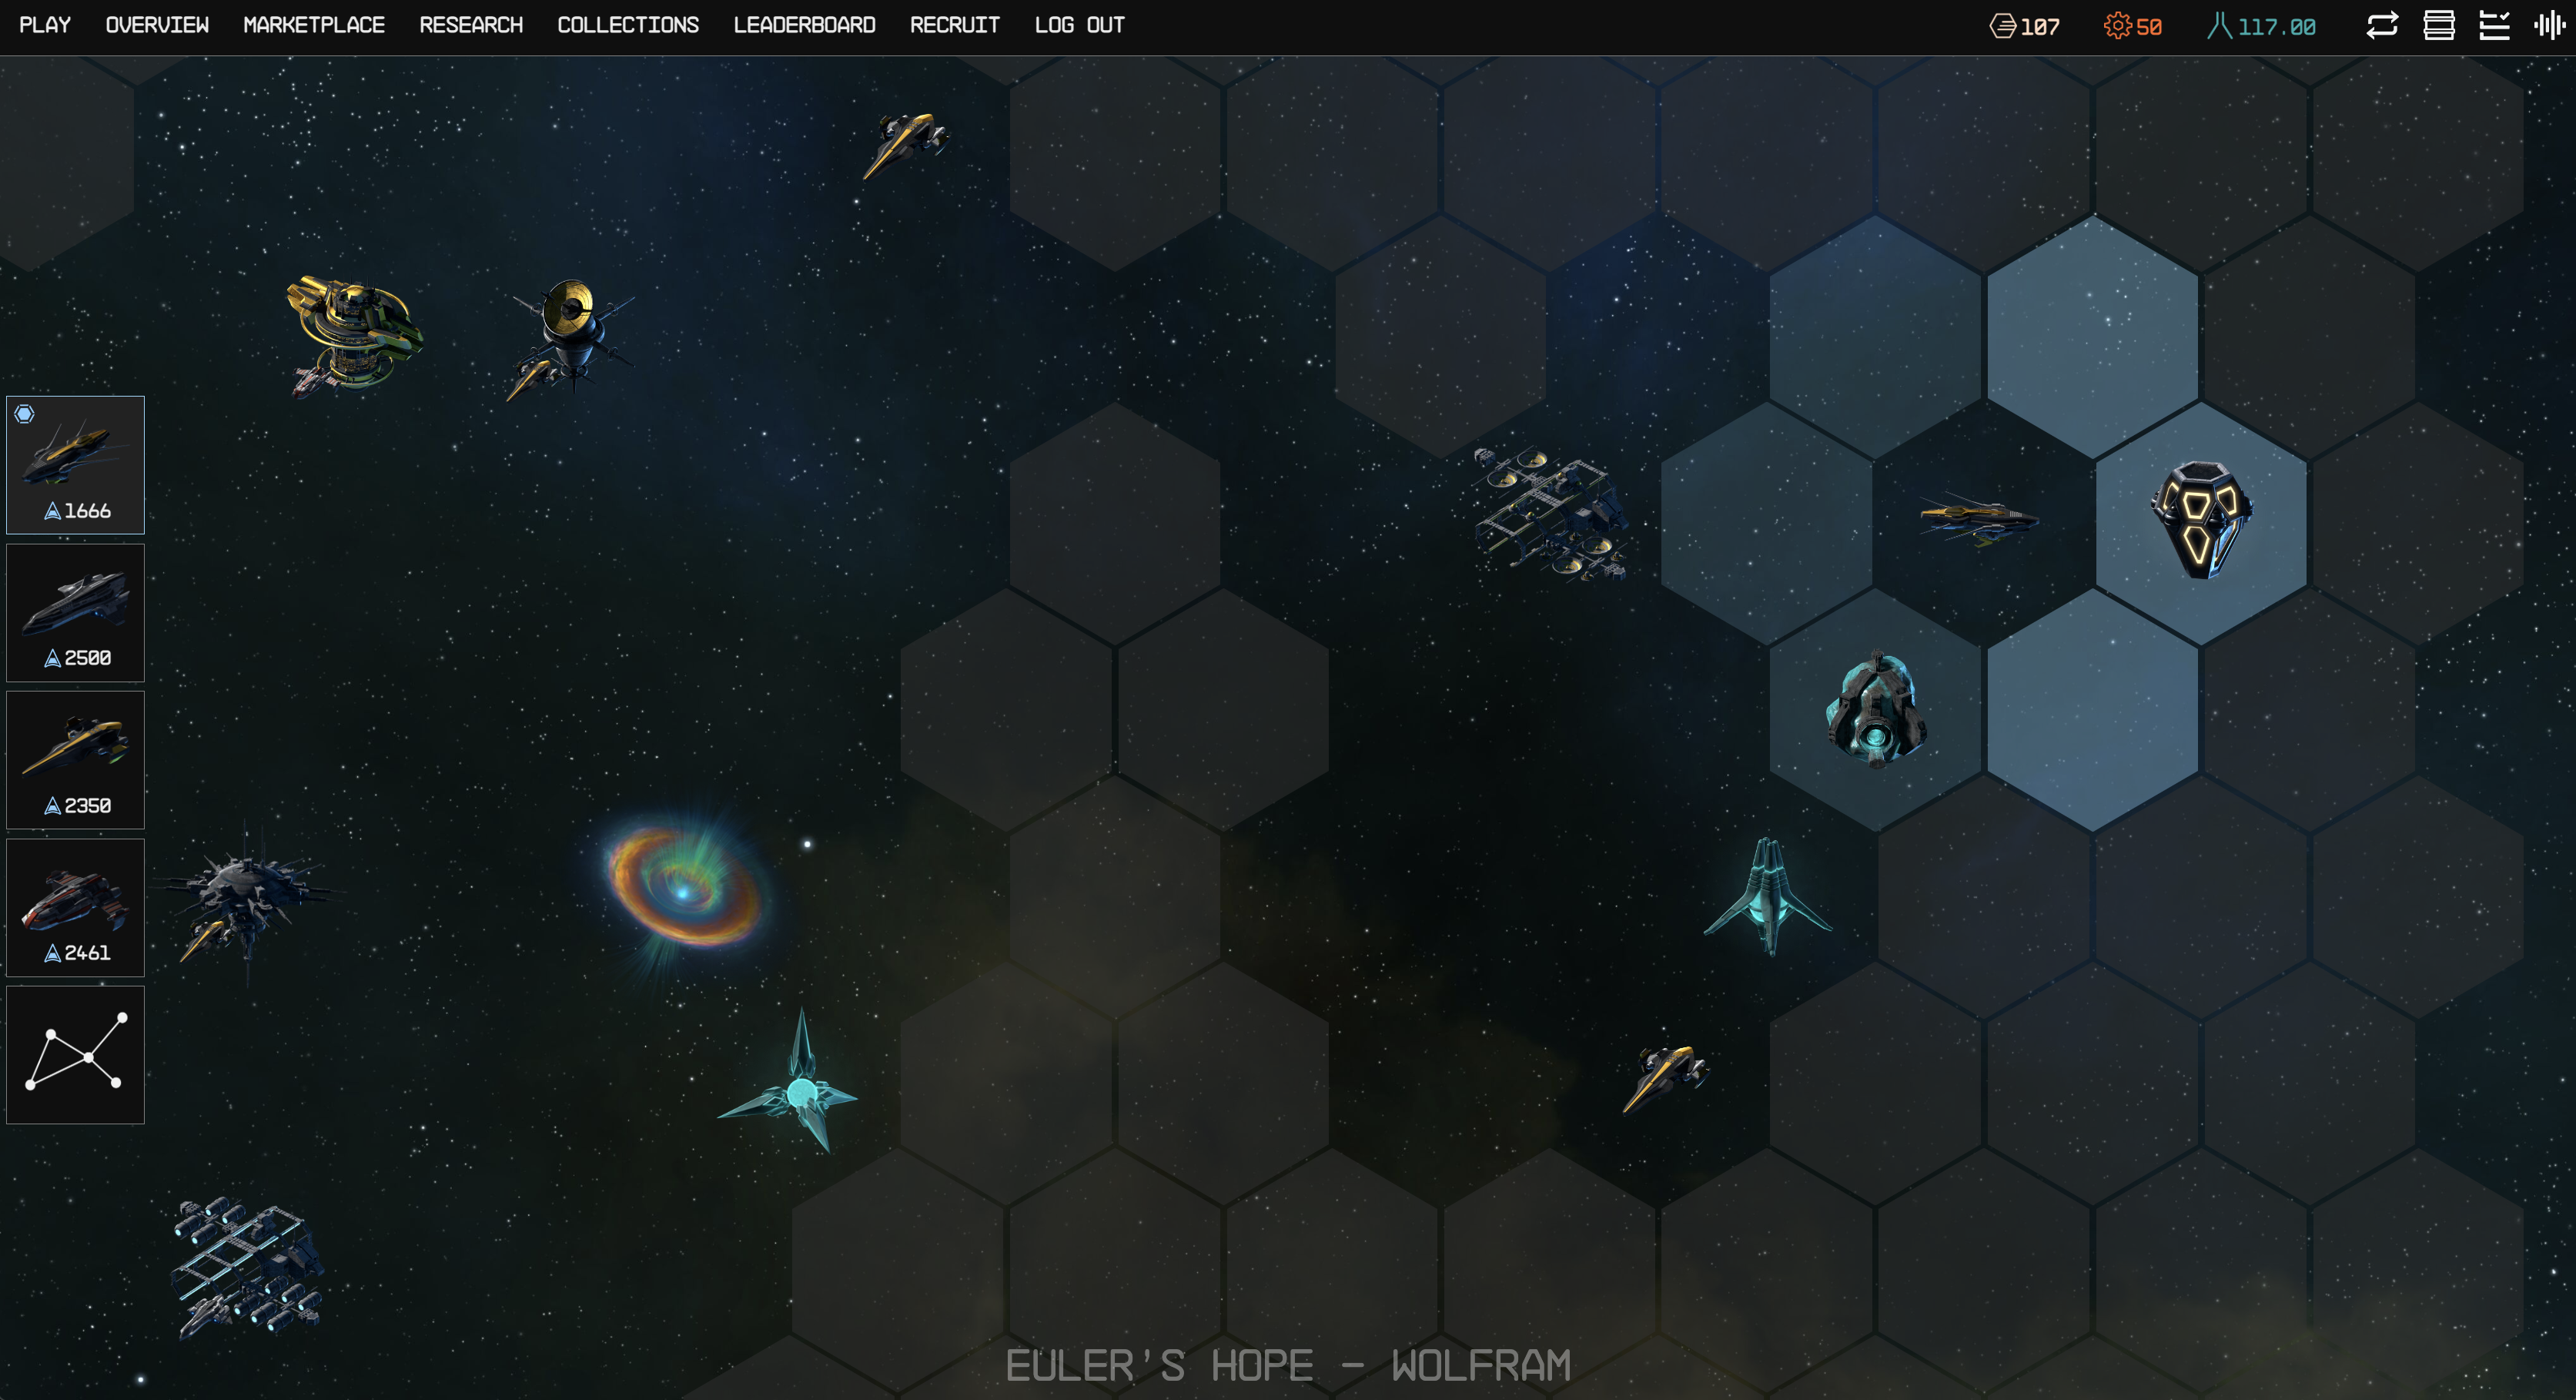 game image from Project Nebula